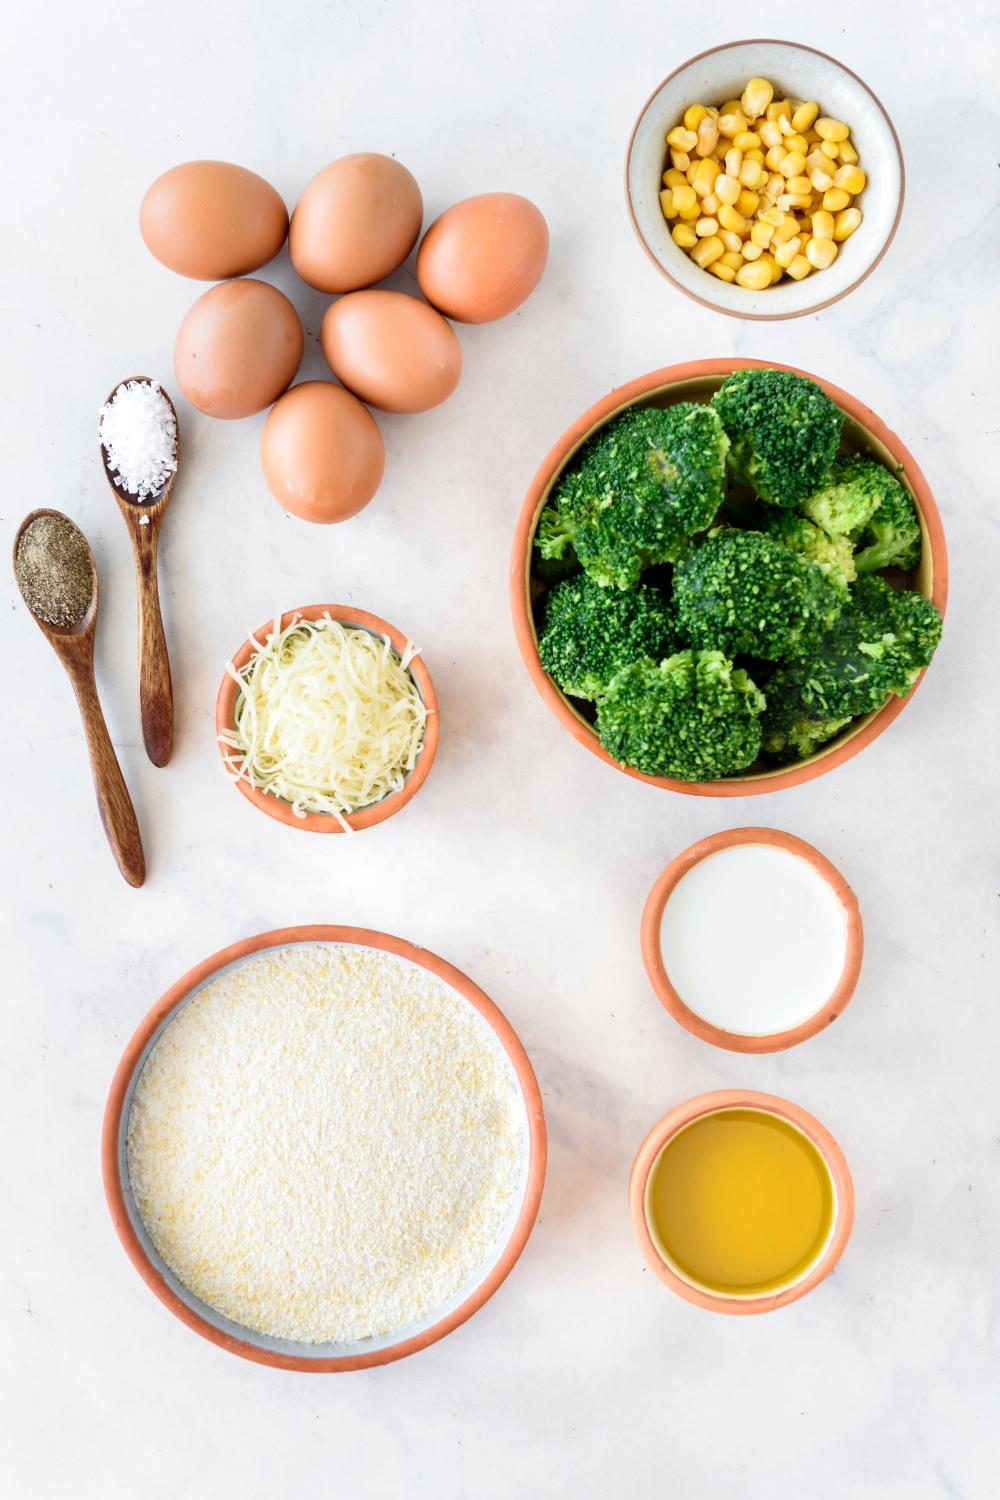 An assortment of ingredients including bowls of broccoli, corn, cornbread mix, milk, shredded cheese, and six whole eggs.